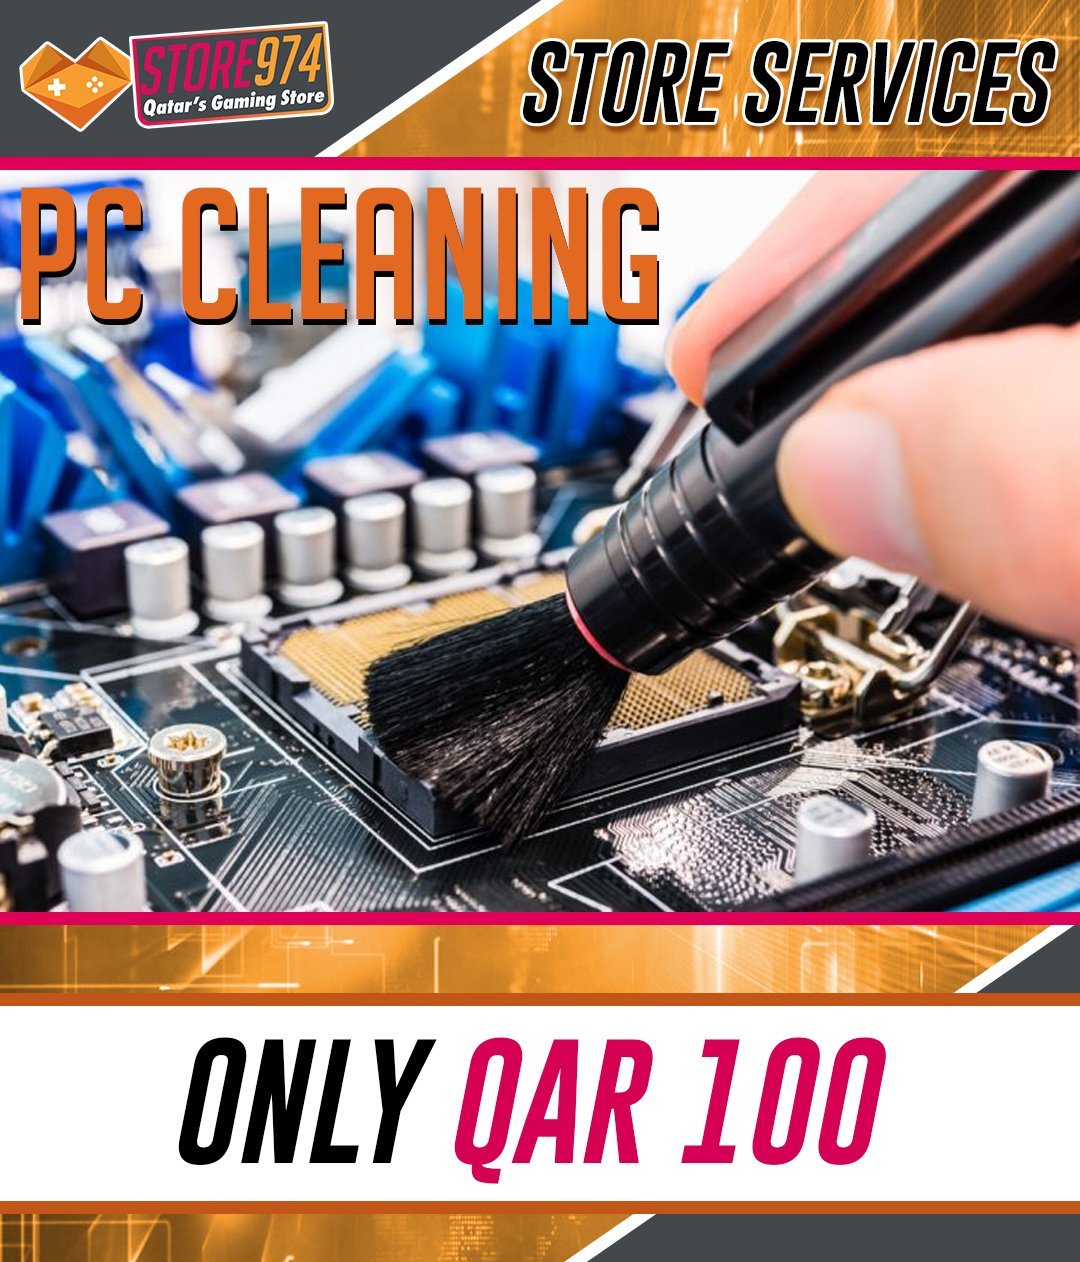 PC Cleaning Service - Store 974 | ستور ٩٧٤